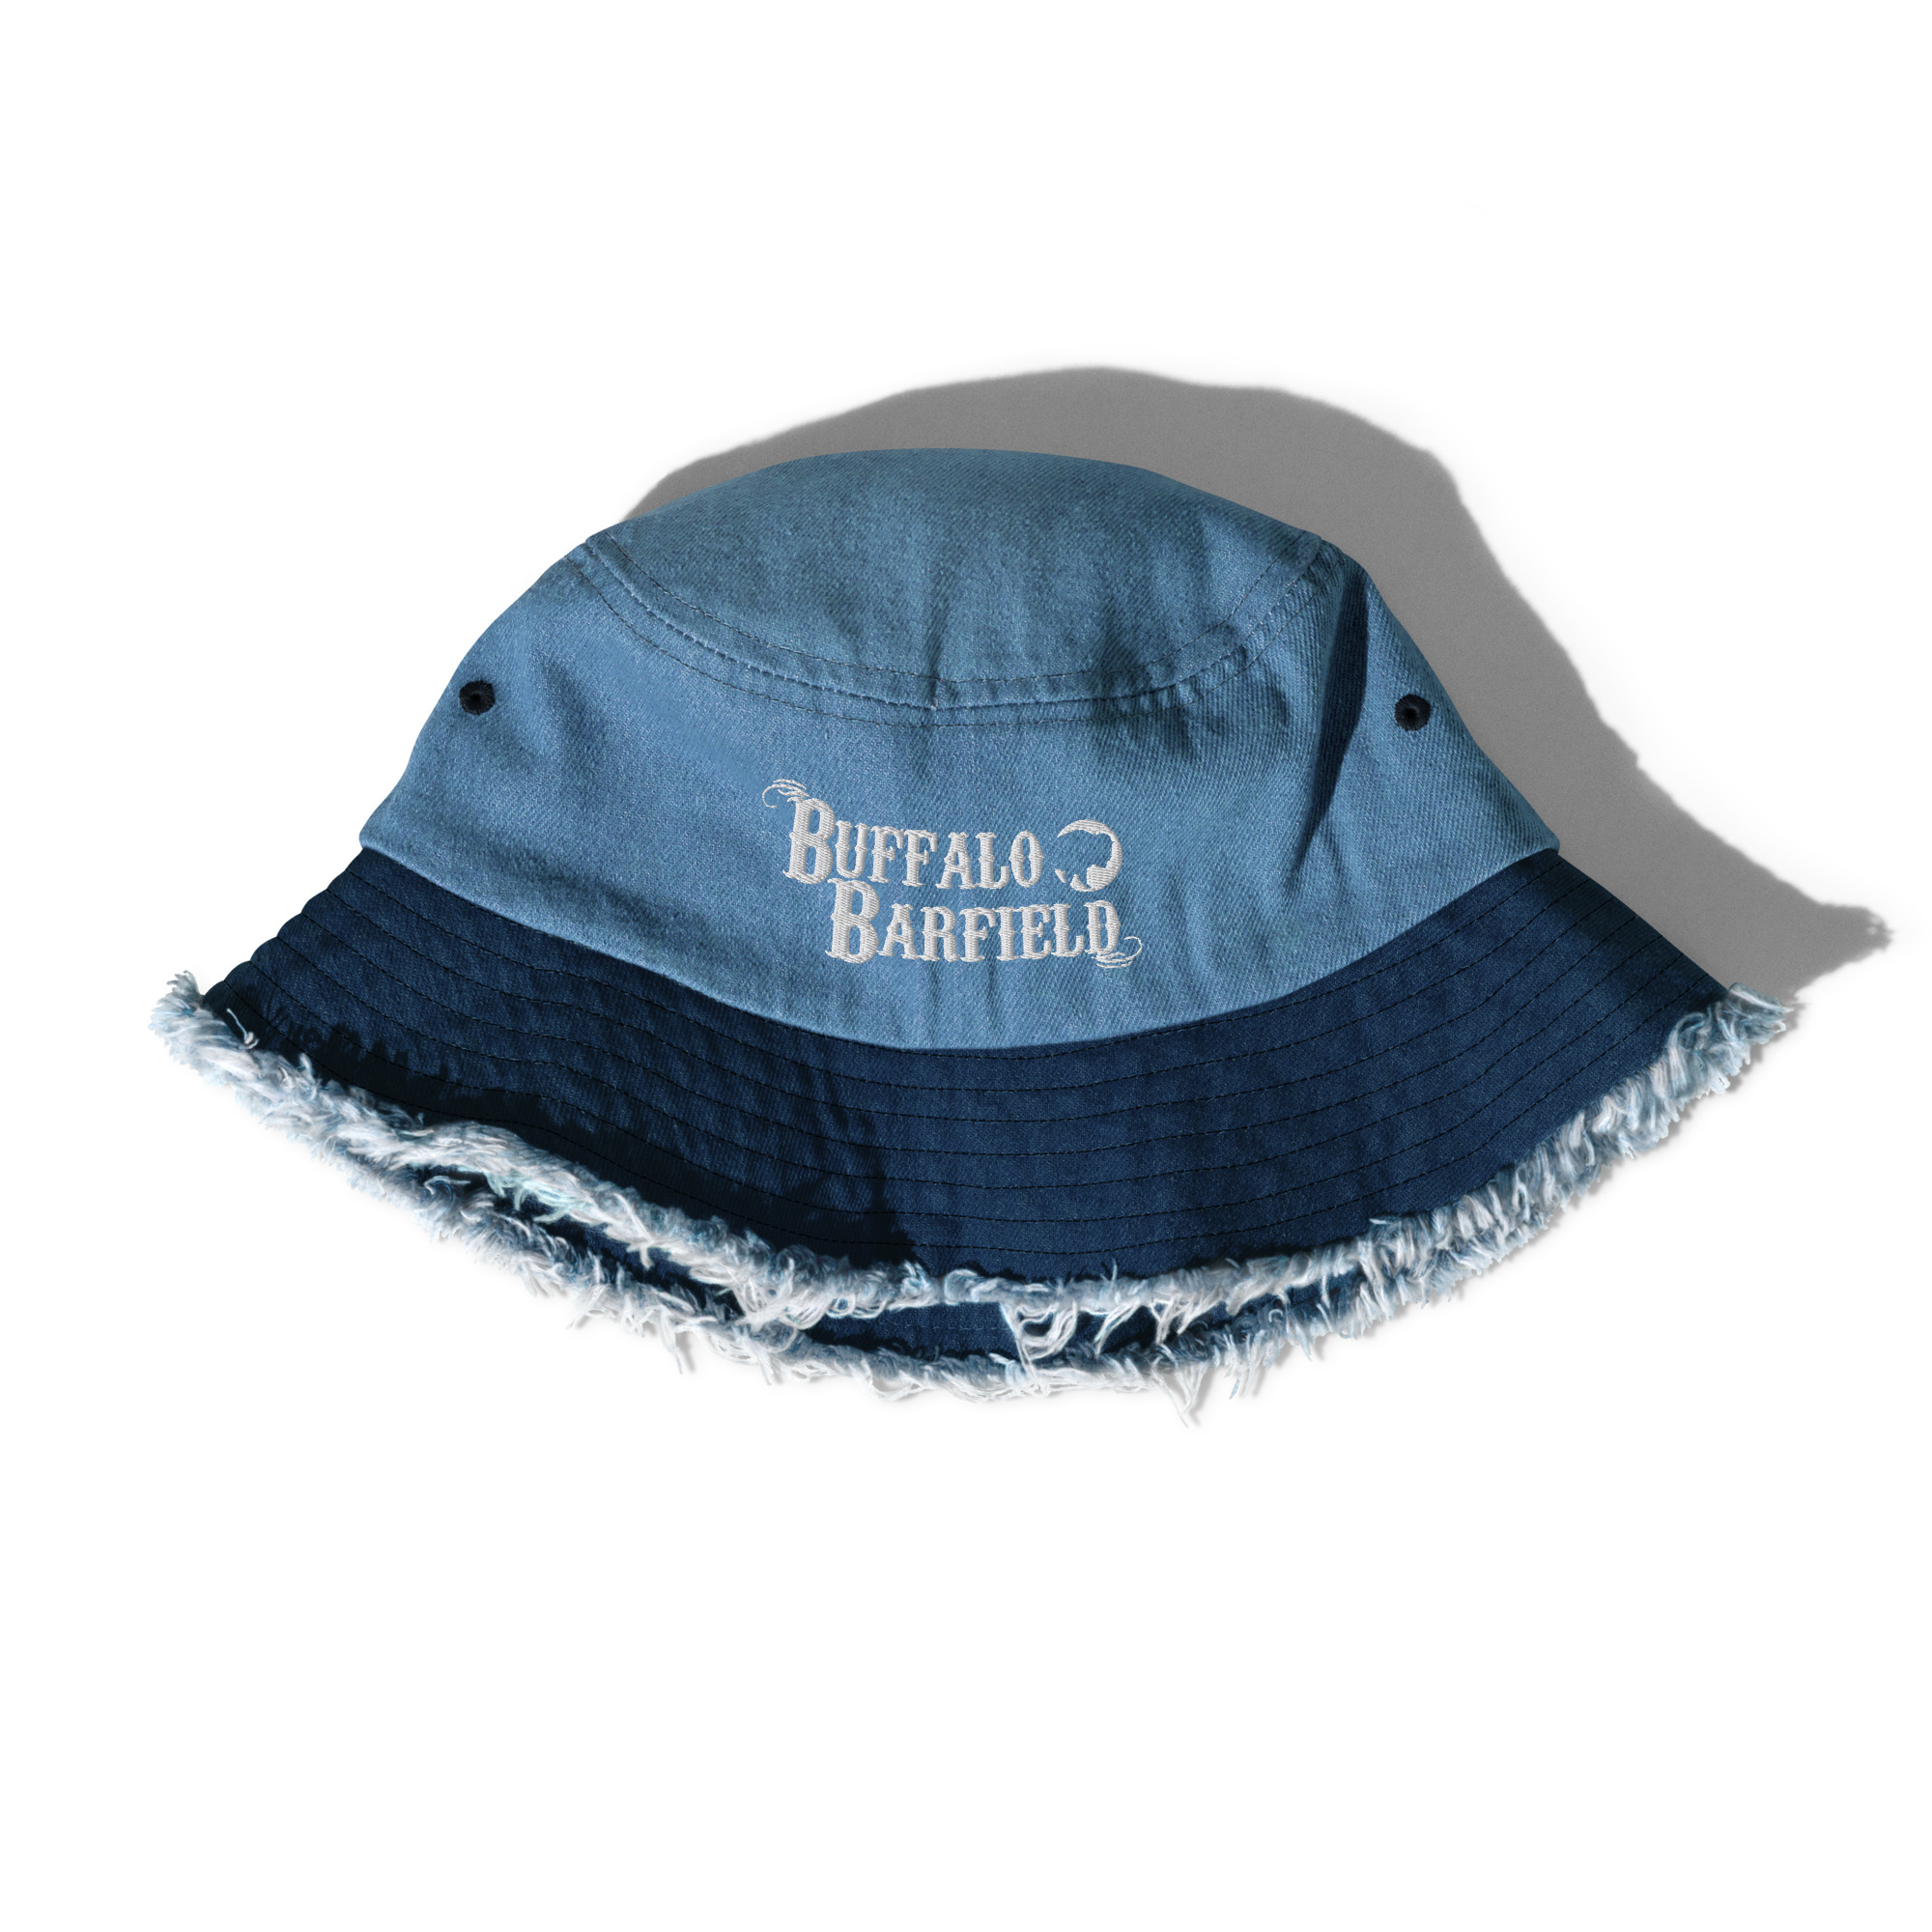 Custom Jean Denim Bucket Hats with Patch Logo - Foremost